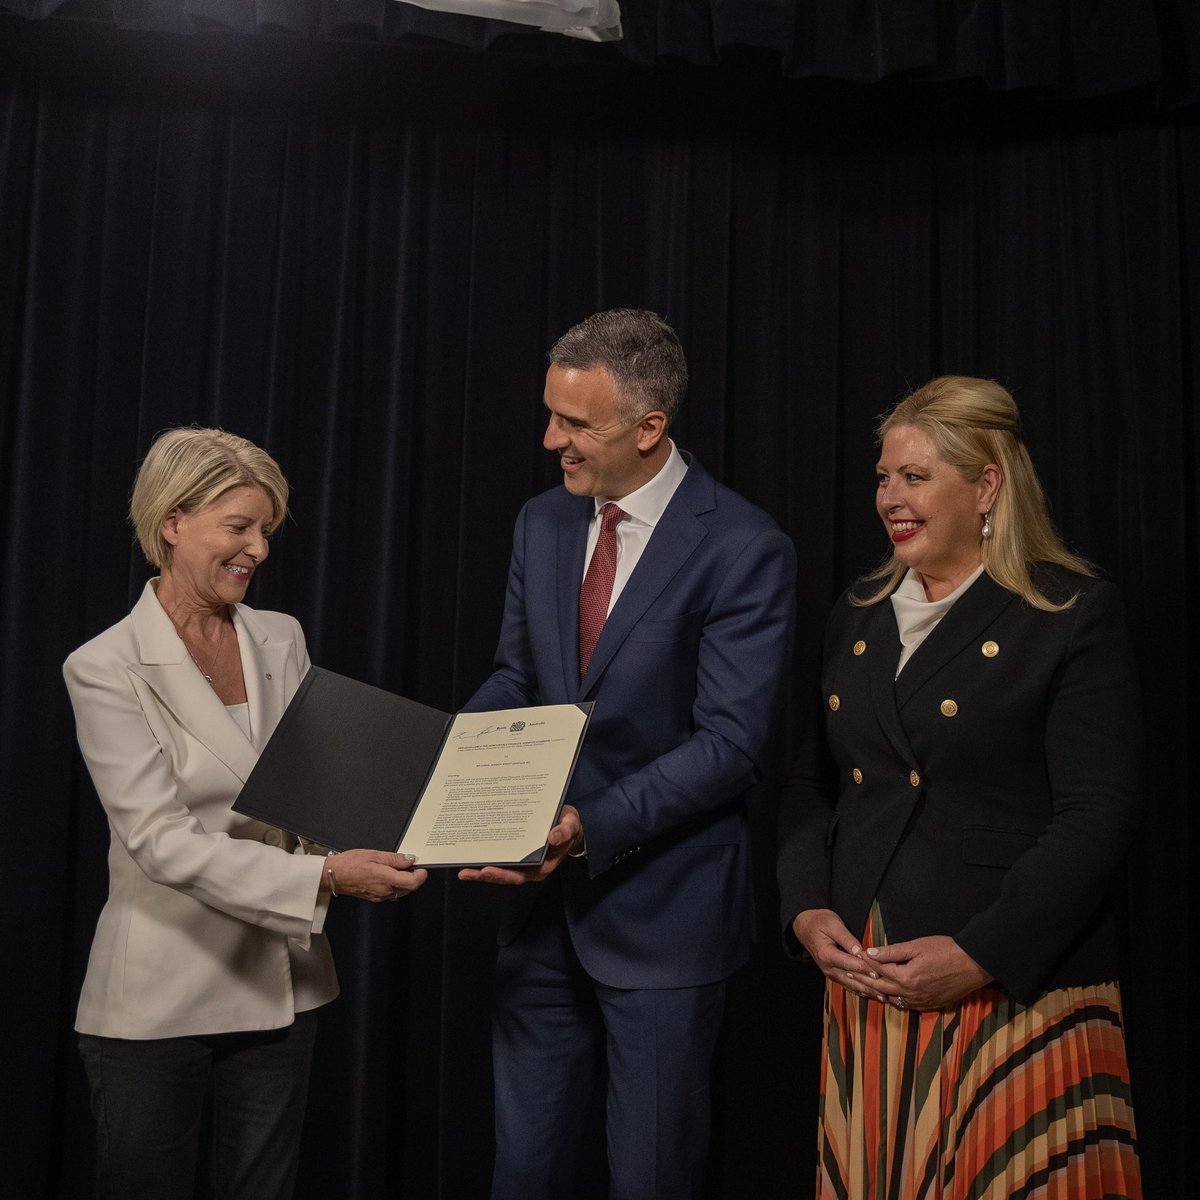 The scourge of domestic, family & sexual violence is horrific & it is incumbent on us all to help prevent it With those impacted in our hearts, I was proud to stand with @PMalinauskasMP to announce that exemplary & enduring advocate @NStottDespoja will lead the Royal Commission